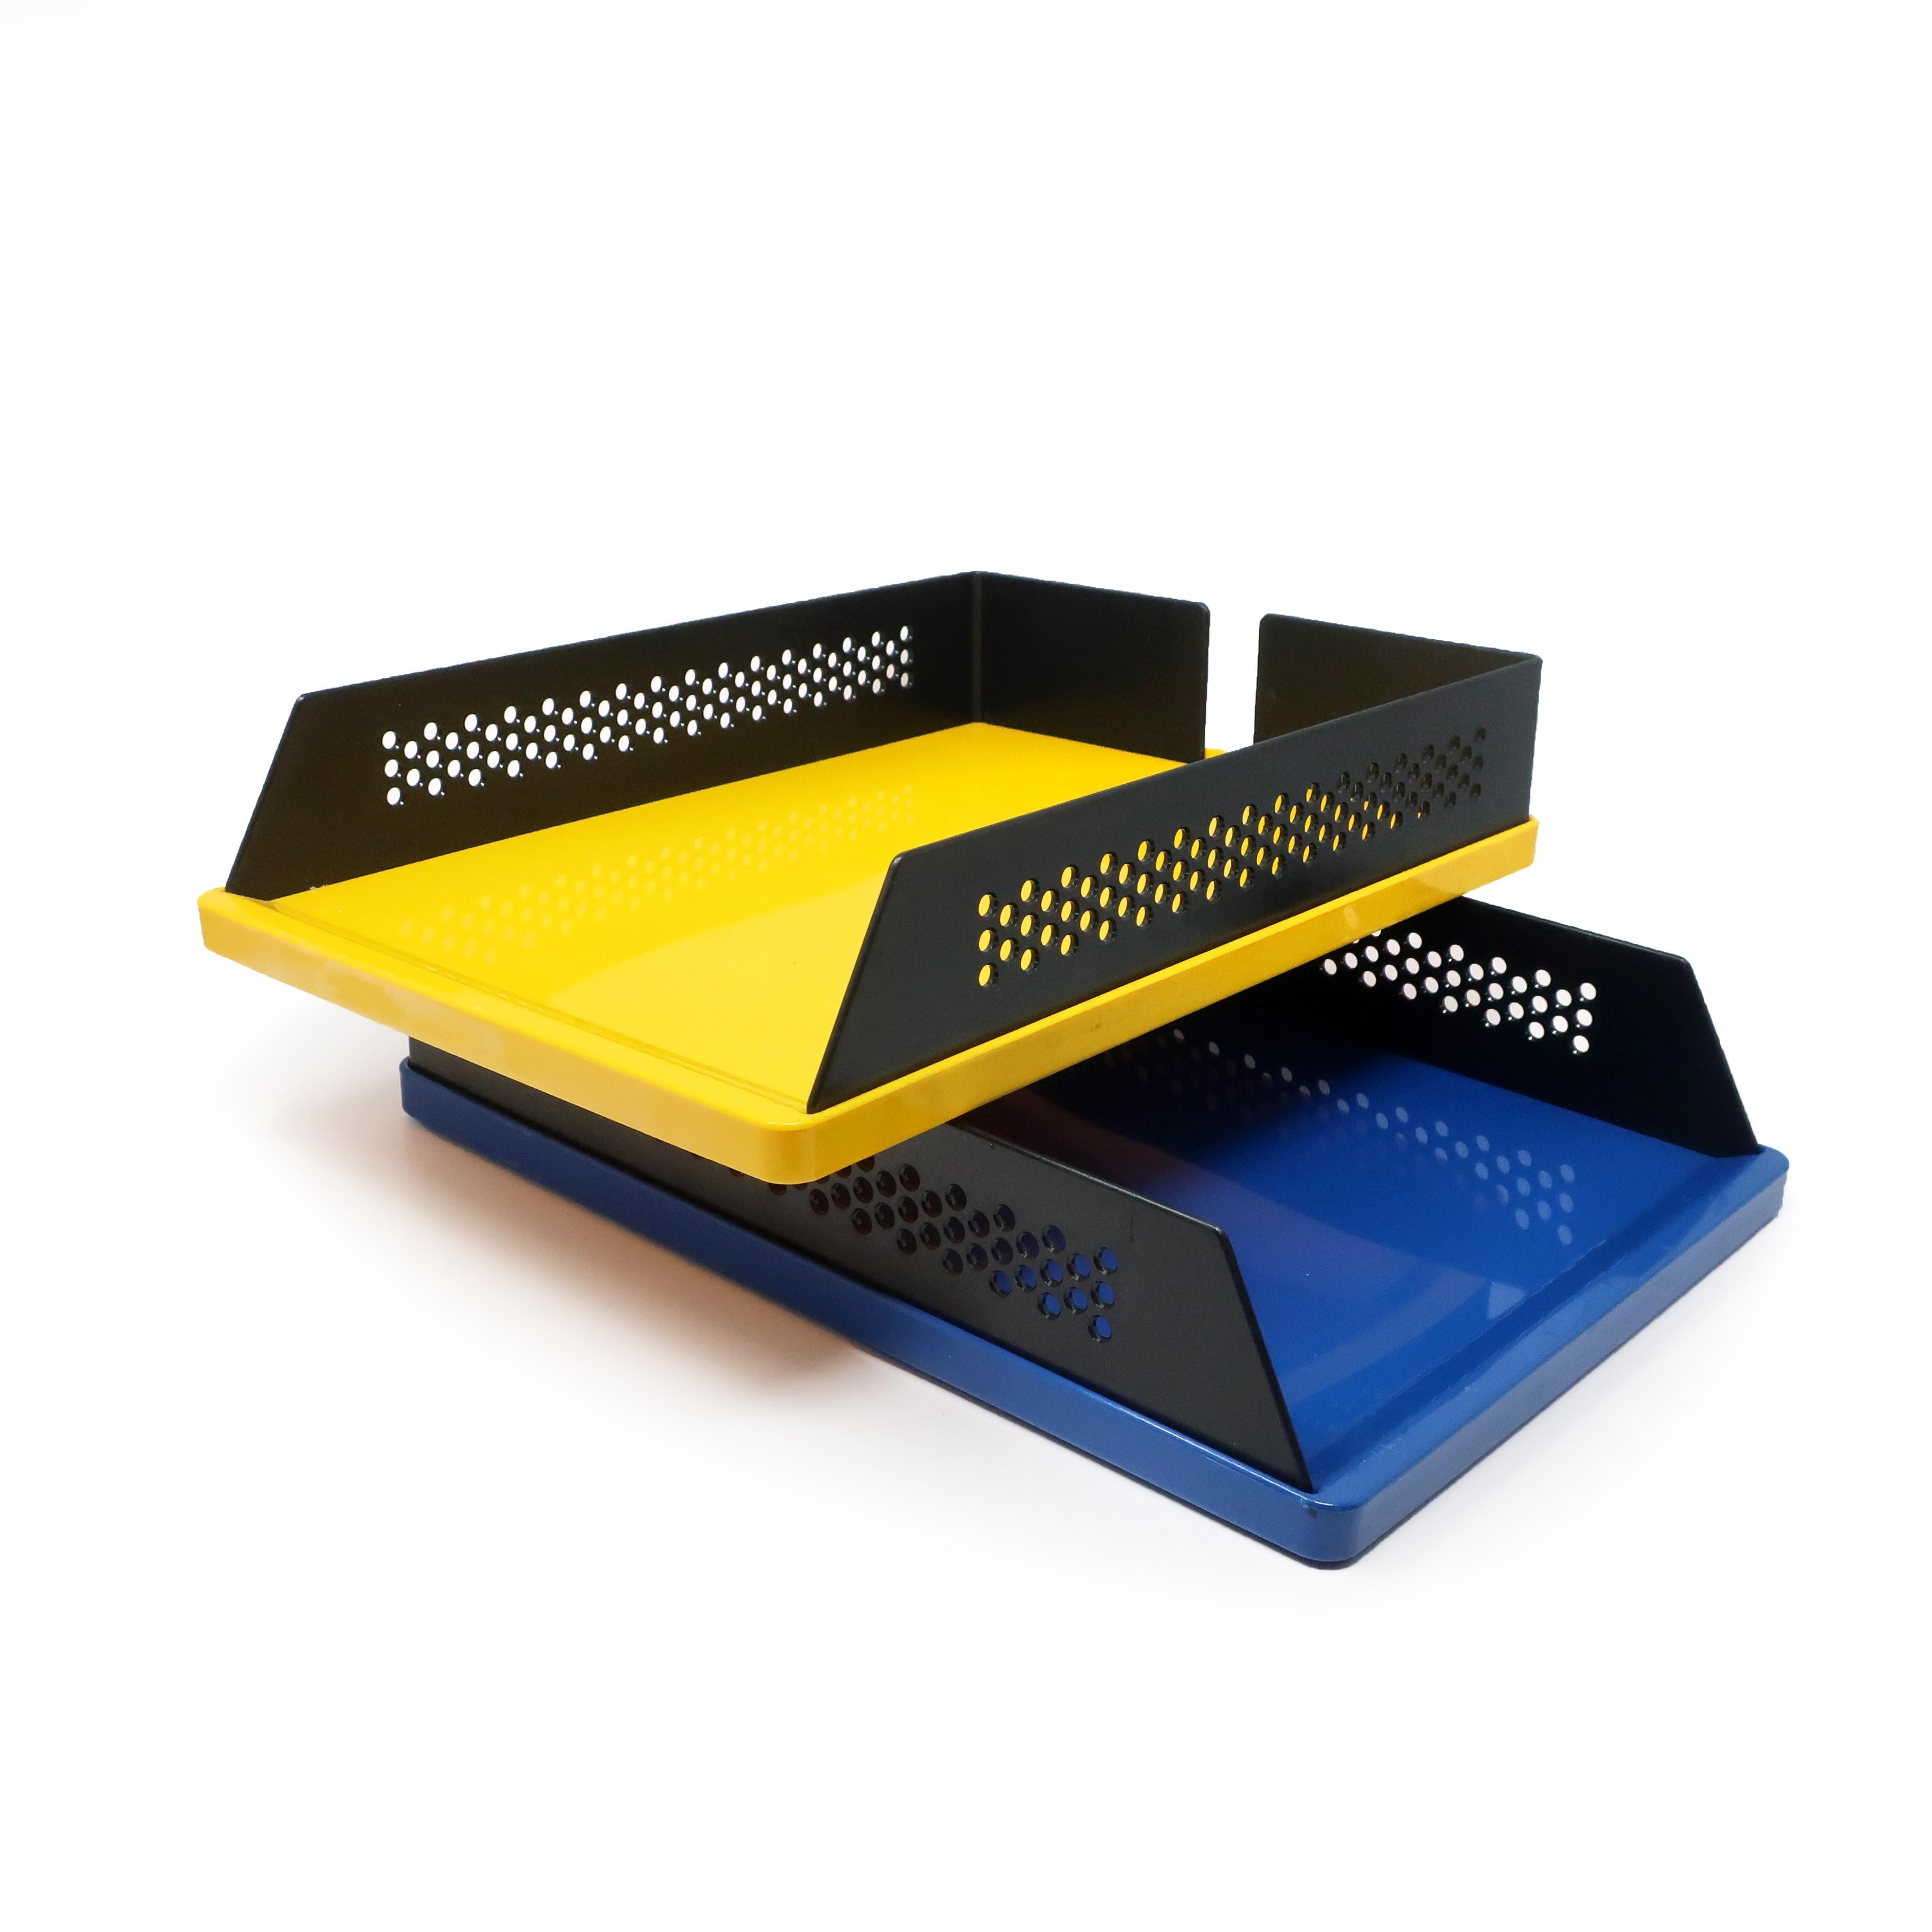 A pair of stylish, stackable blue and yellow plastic letter trays with black accents designed by Raul Barbieri and Giorgio Marianelli for Rexite in 1980. The Babele 940 is 1980s Italian postmodern design at its finest, plus they are stackable and